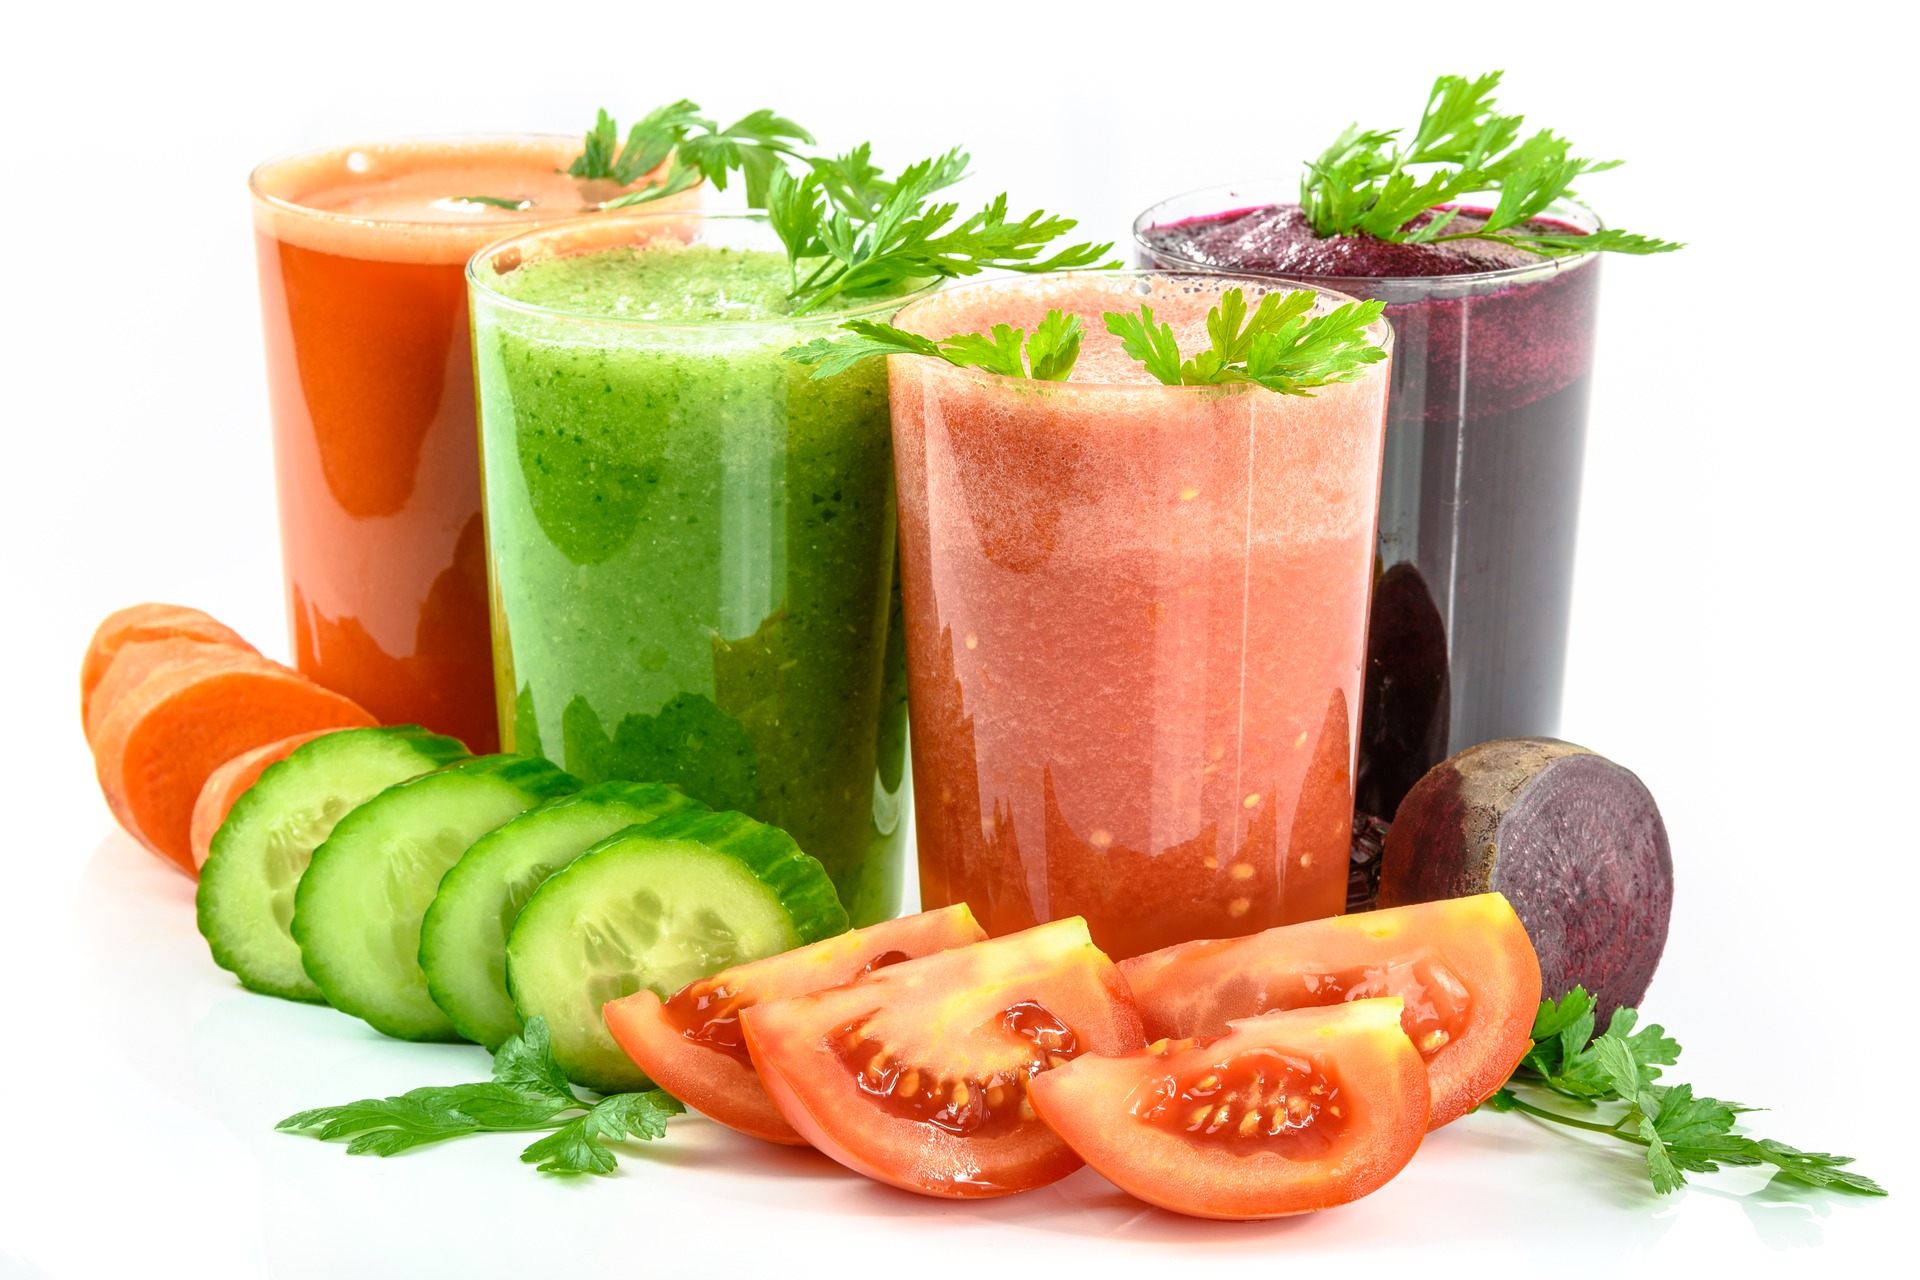 Try Something New With These Great Juicing Tips!